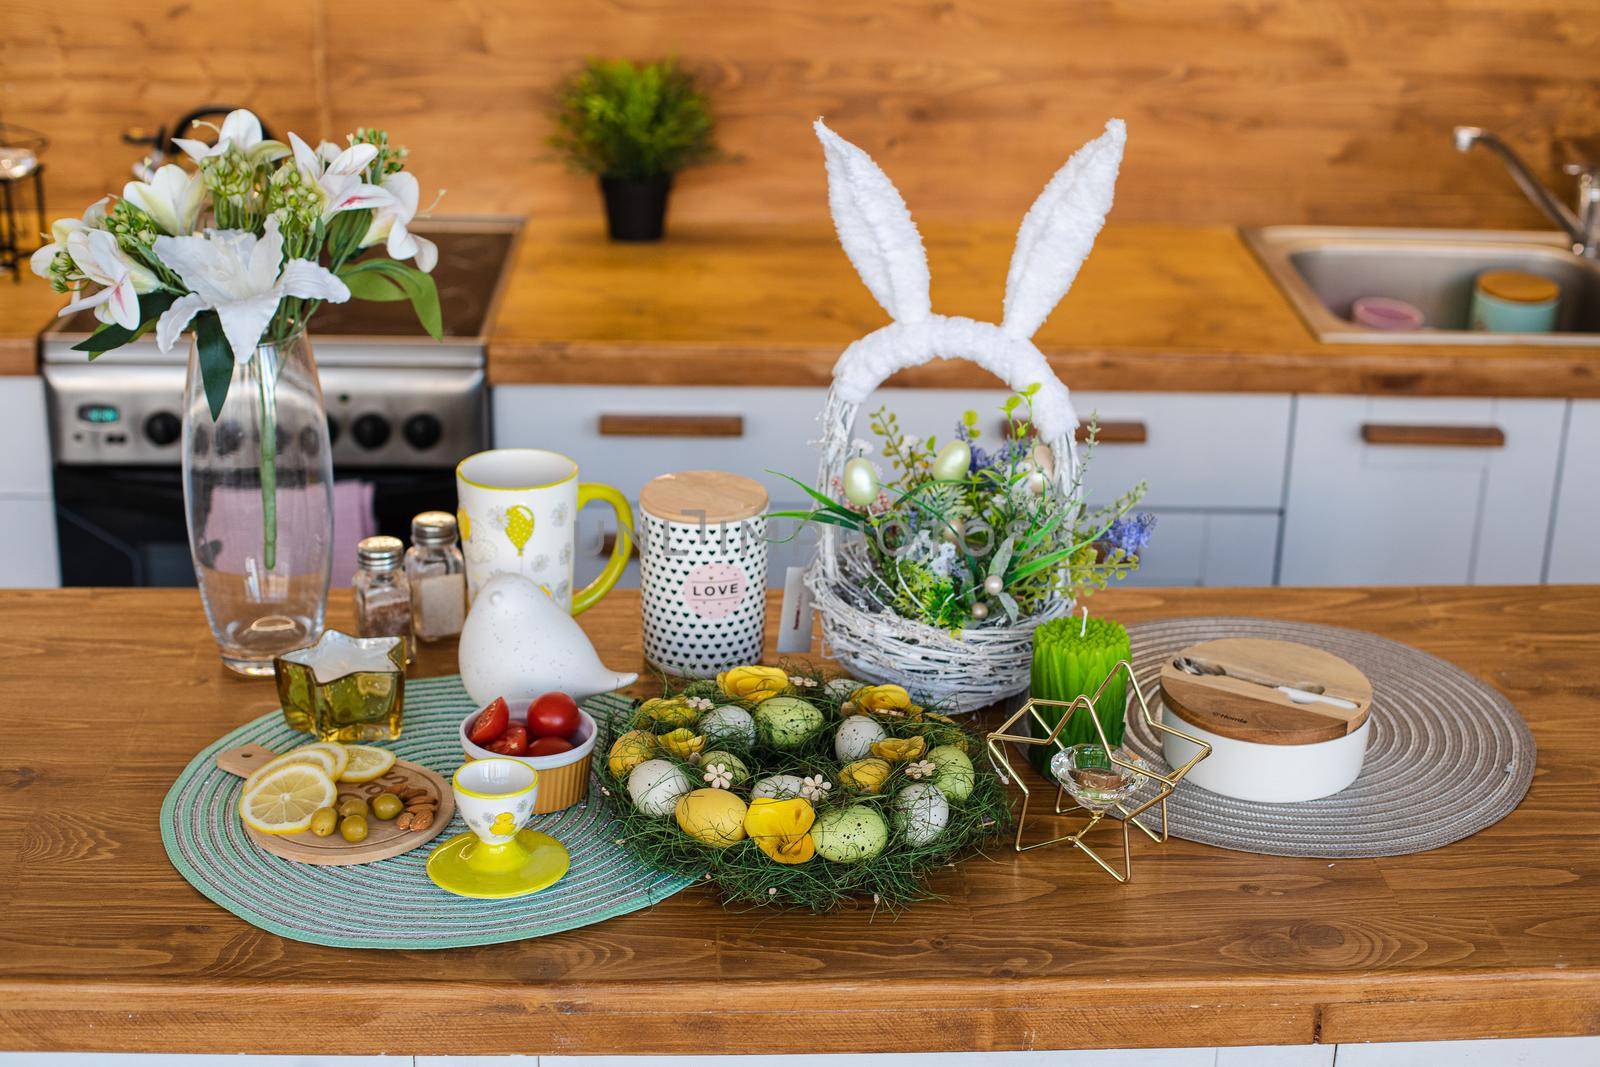 Easter celebration on wooden kitchen counter. Dyed eggs with snacks and basket with bunny ears on wooden counter.